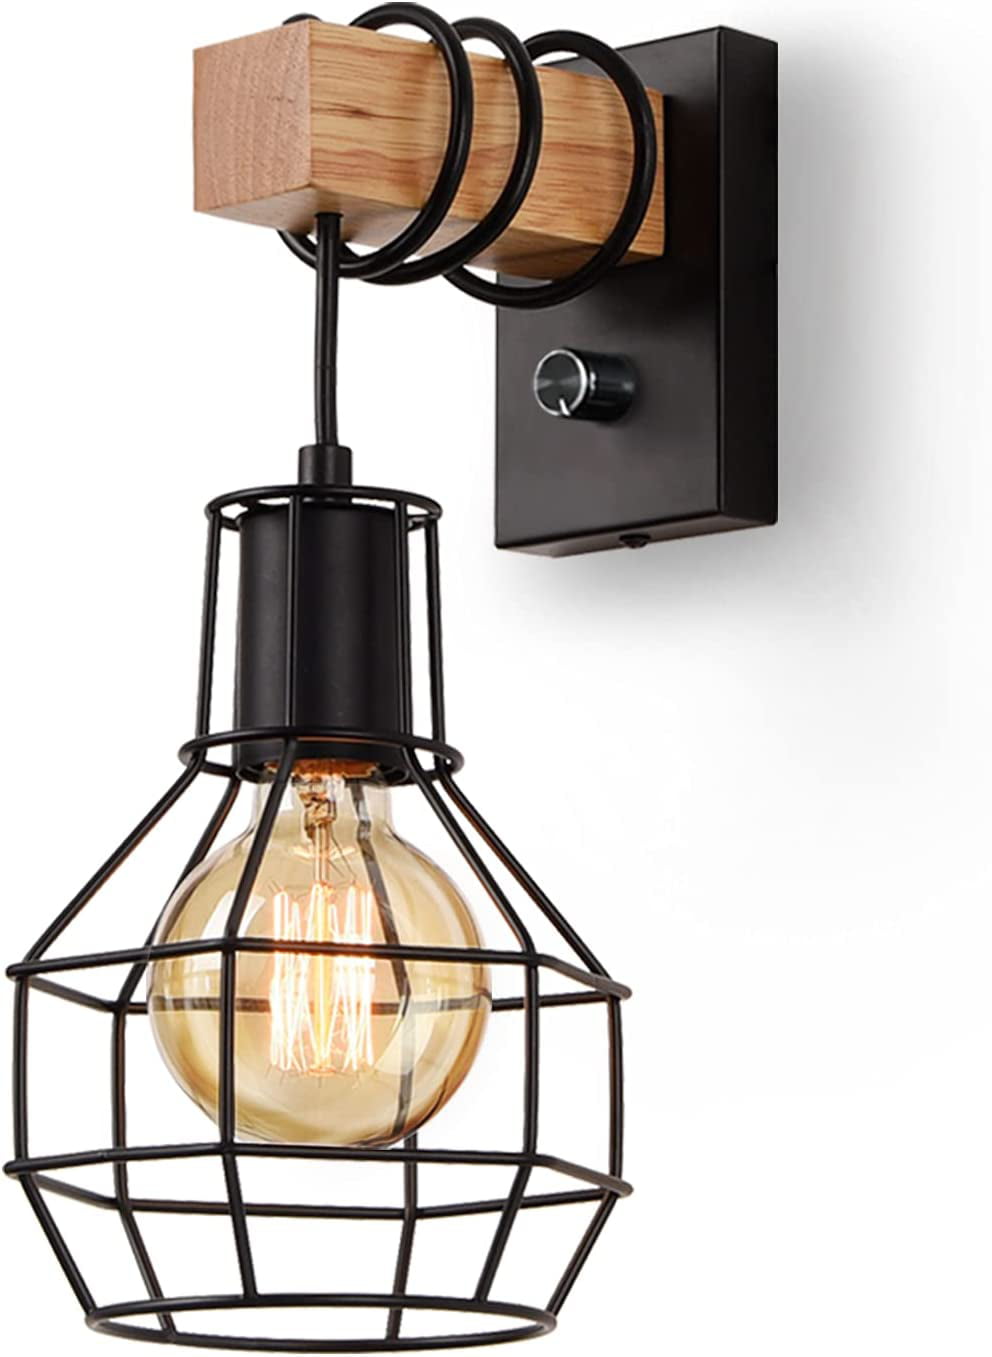 Wall Lamp Plug In Industrial Country Style Vintage Wall Sconce Rustic Lighting Fixture Lights With Wall Sconces Lamp Cylinder Glass Shade Use E27 Bulb Color : Warm, Size : Free size 